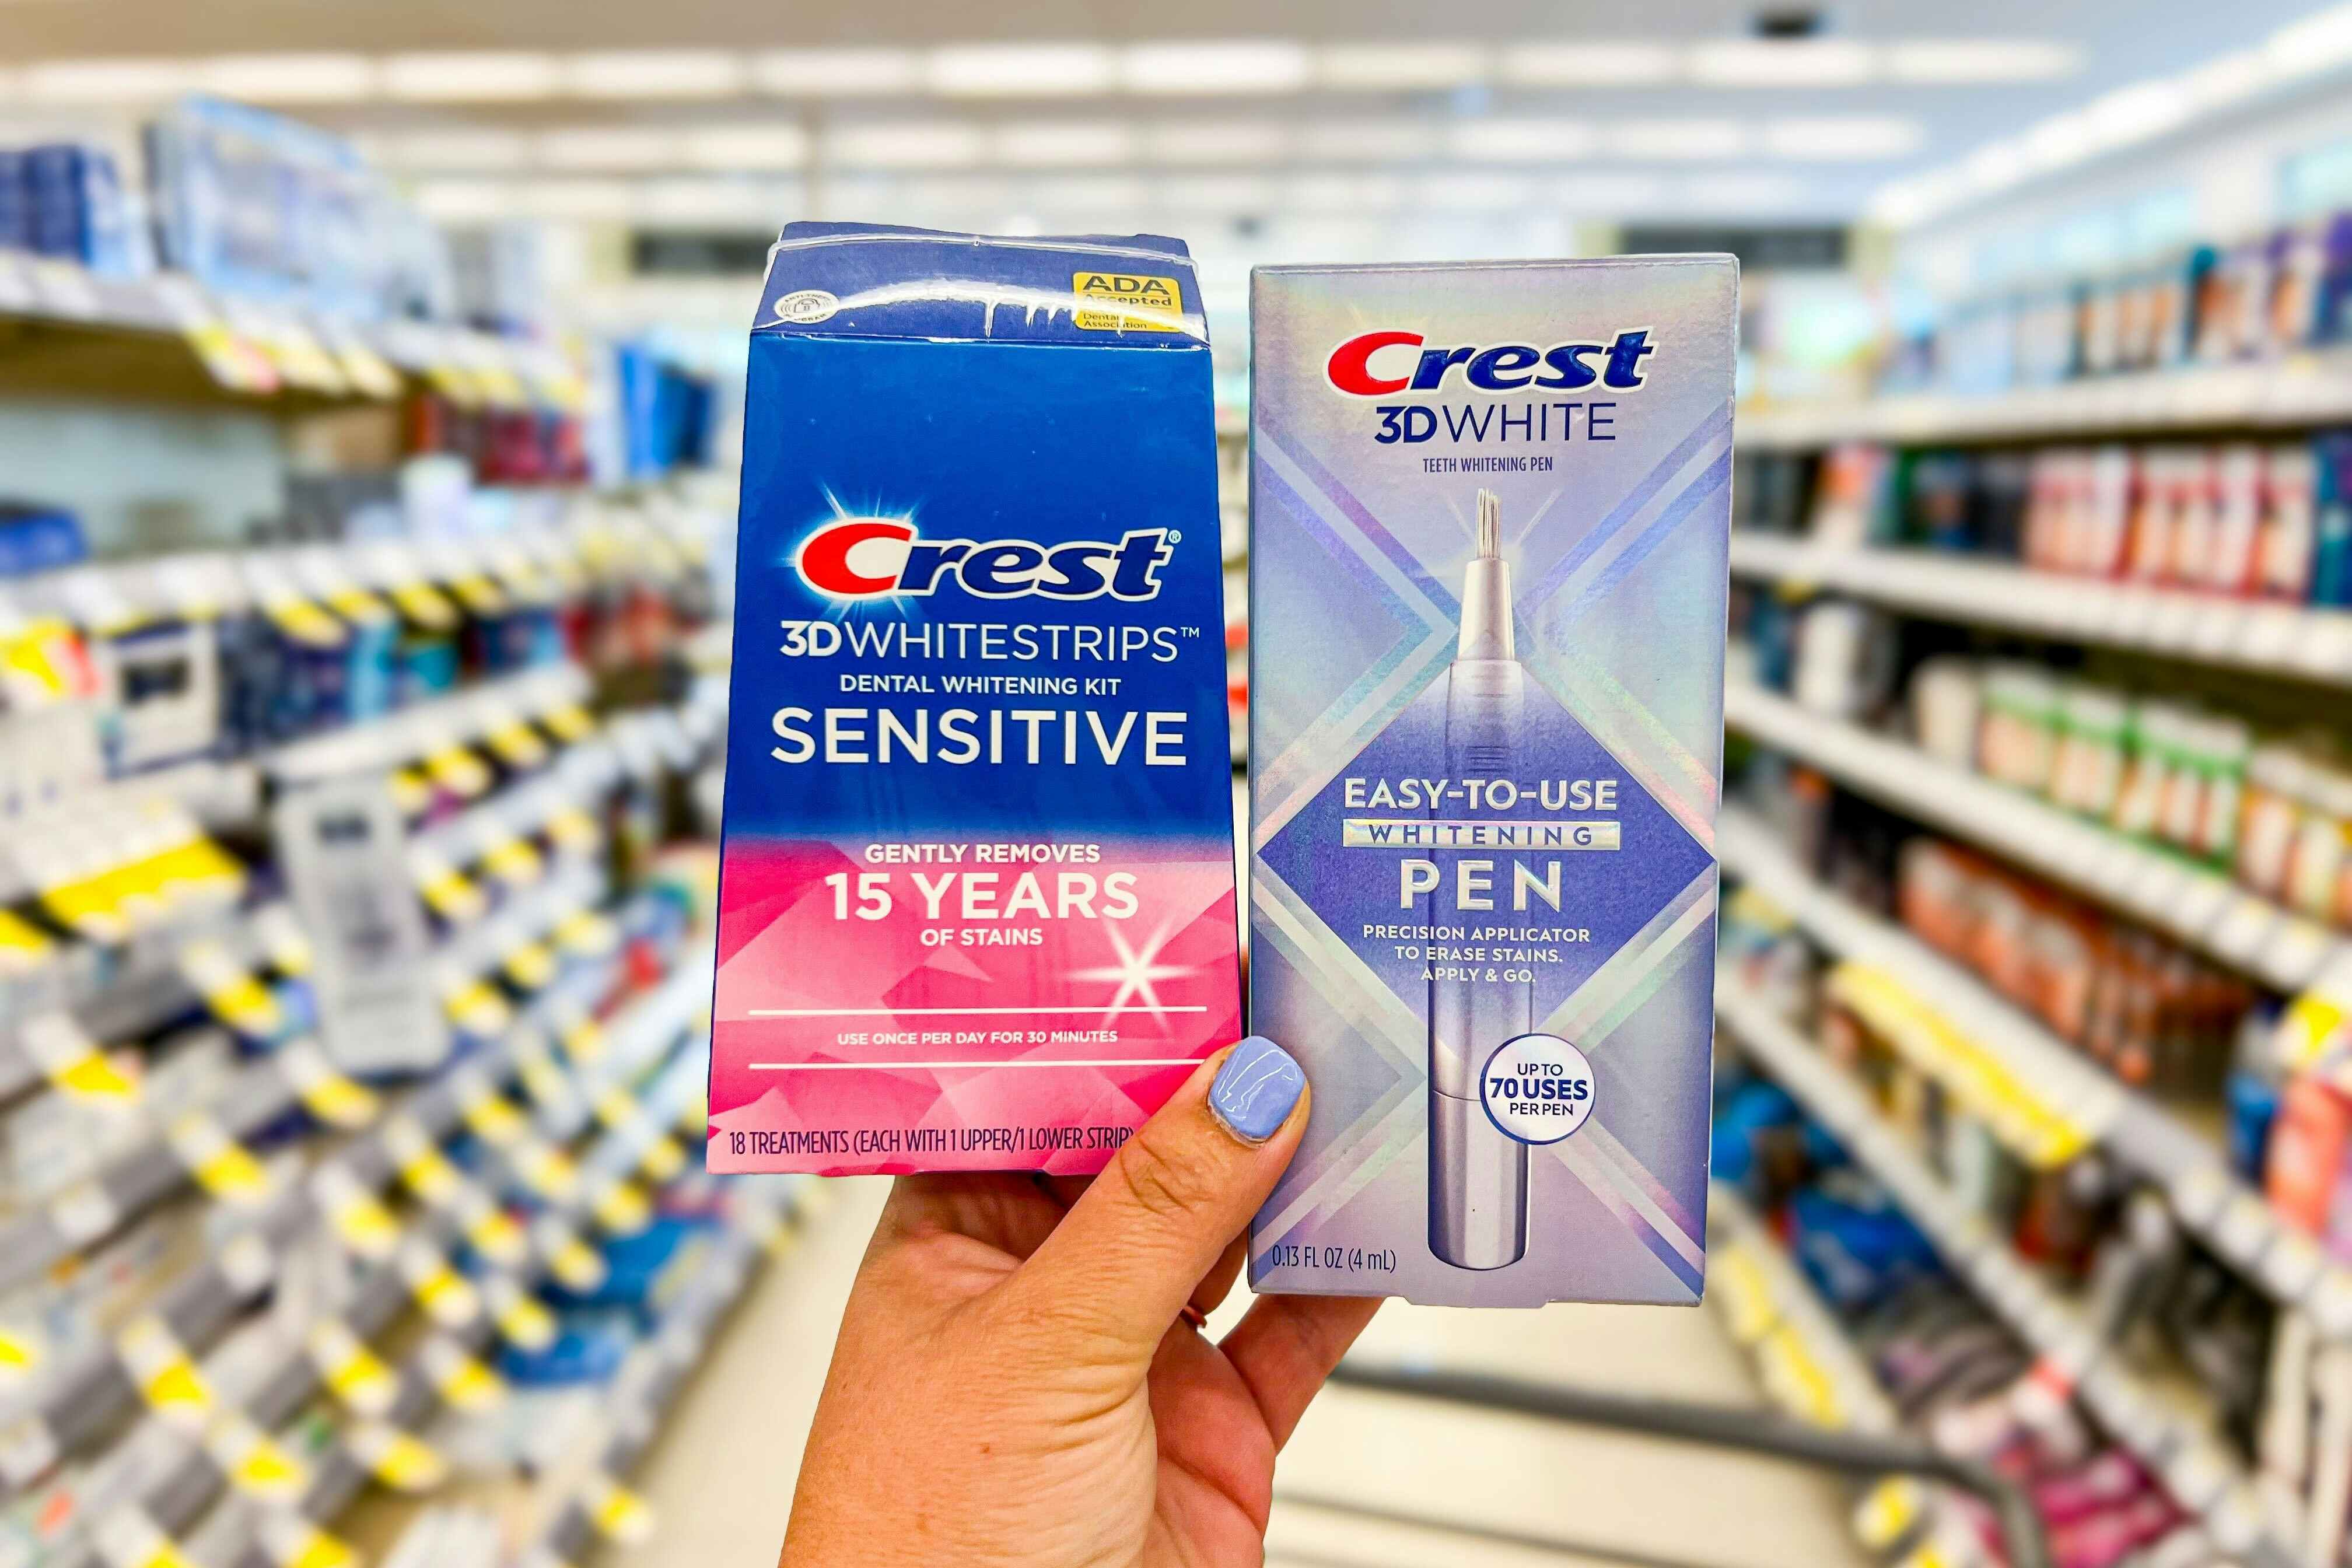 Get Free Crest 3D Whitening Pen and Whitestrips, Only at Walgreens